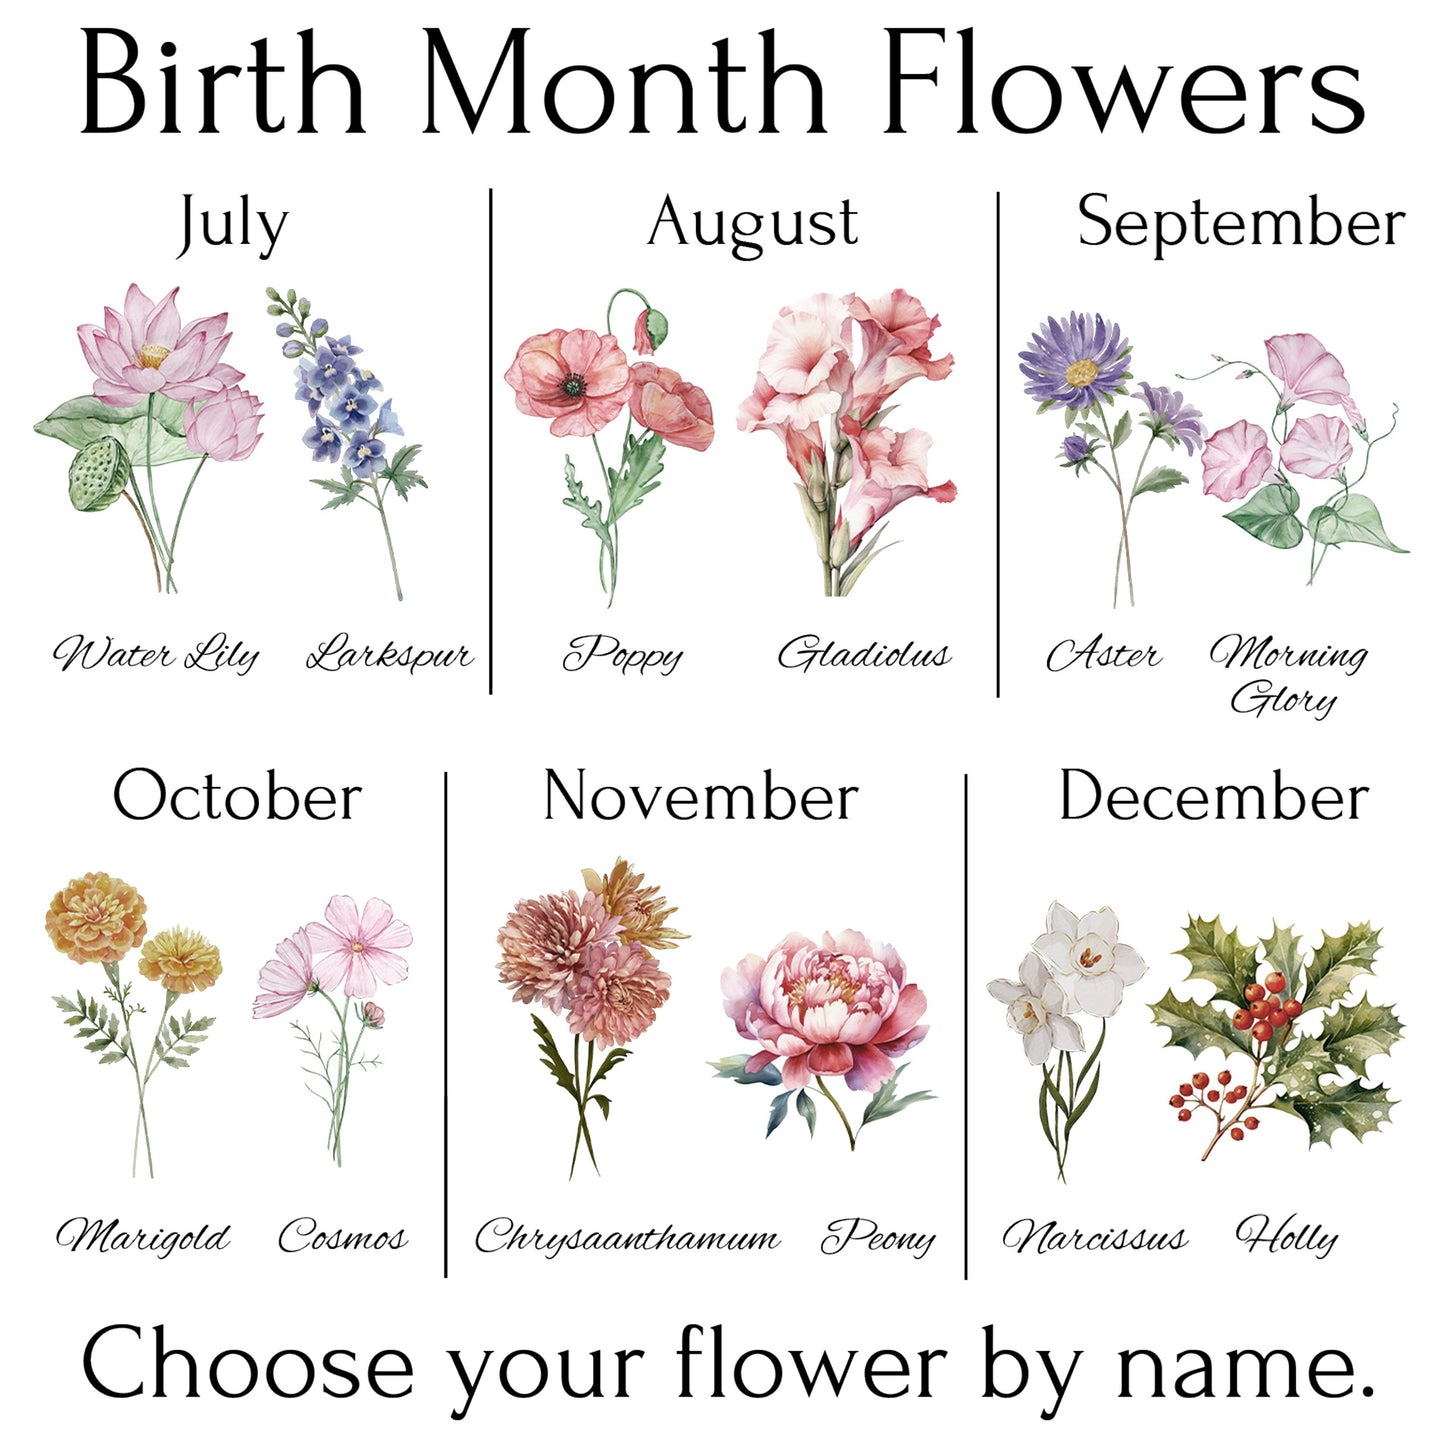 Load image into Gallery viewer, Personalized Gift for Mom and Grandma Birth Flower Bouquet Gift Custom Mother Day Gift Personalized Garden Print Birth Month Flower Art Sign
